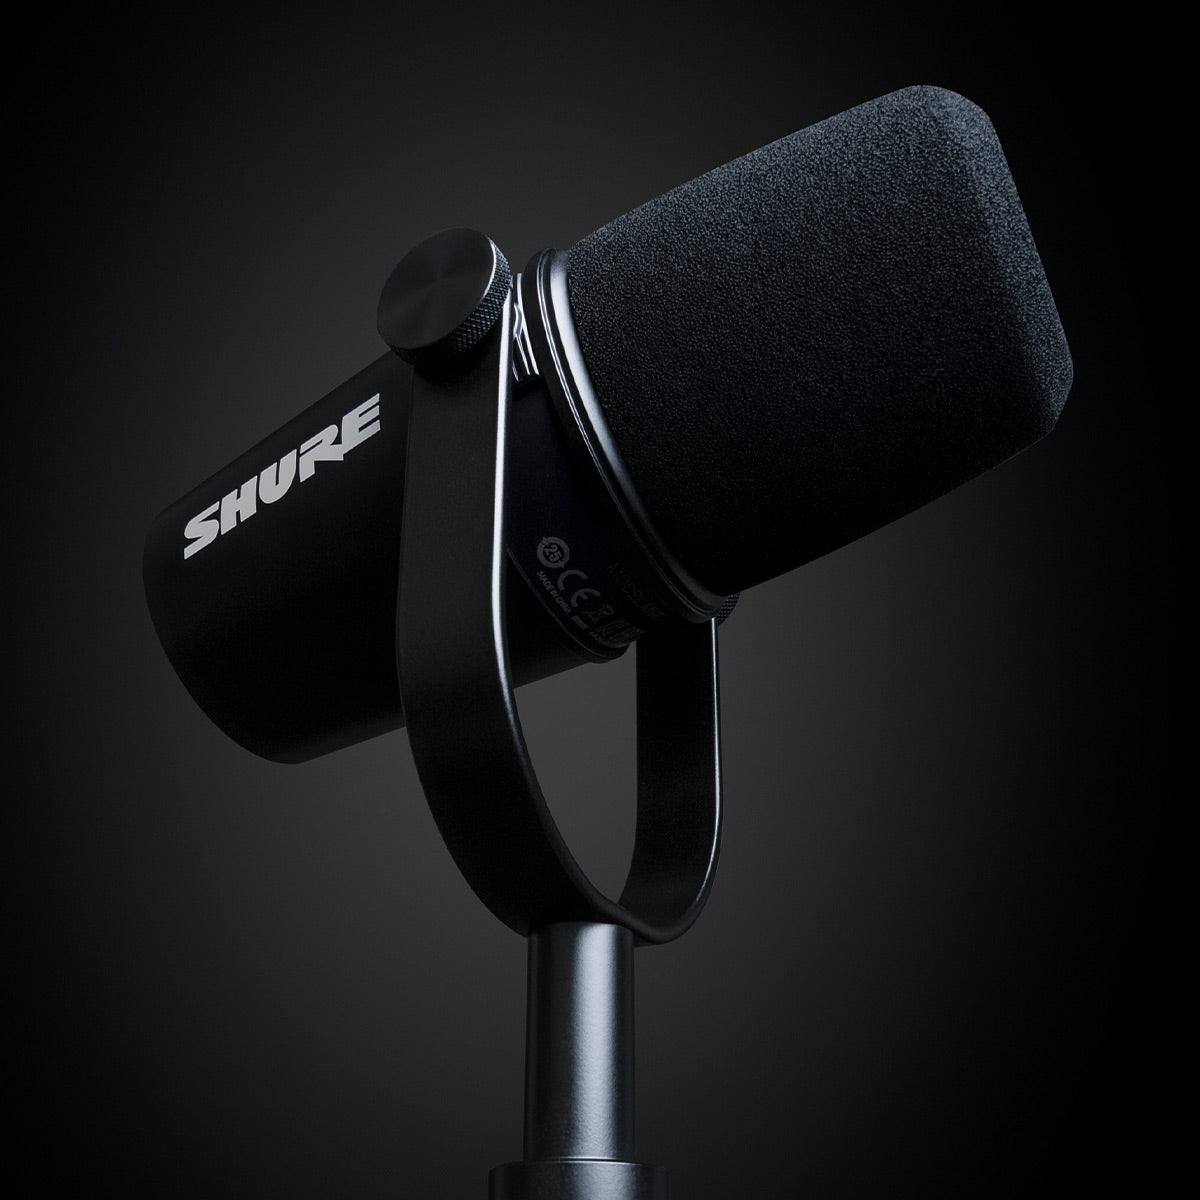 Shure MV7 USB/XLR Dynamic Microphone for Podcasting, Recording, Live Streaming & Gaming with Built-in Headphone Output (Black)